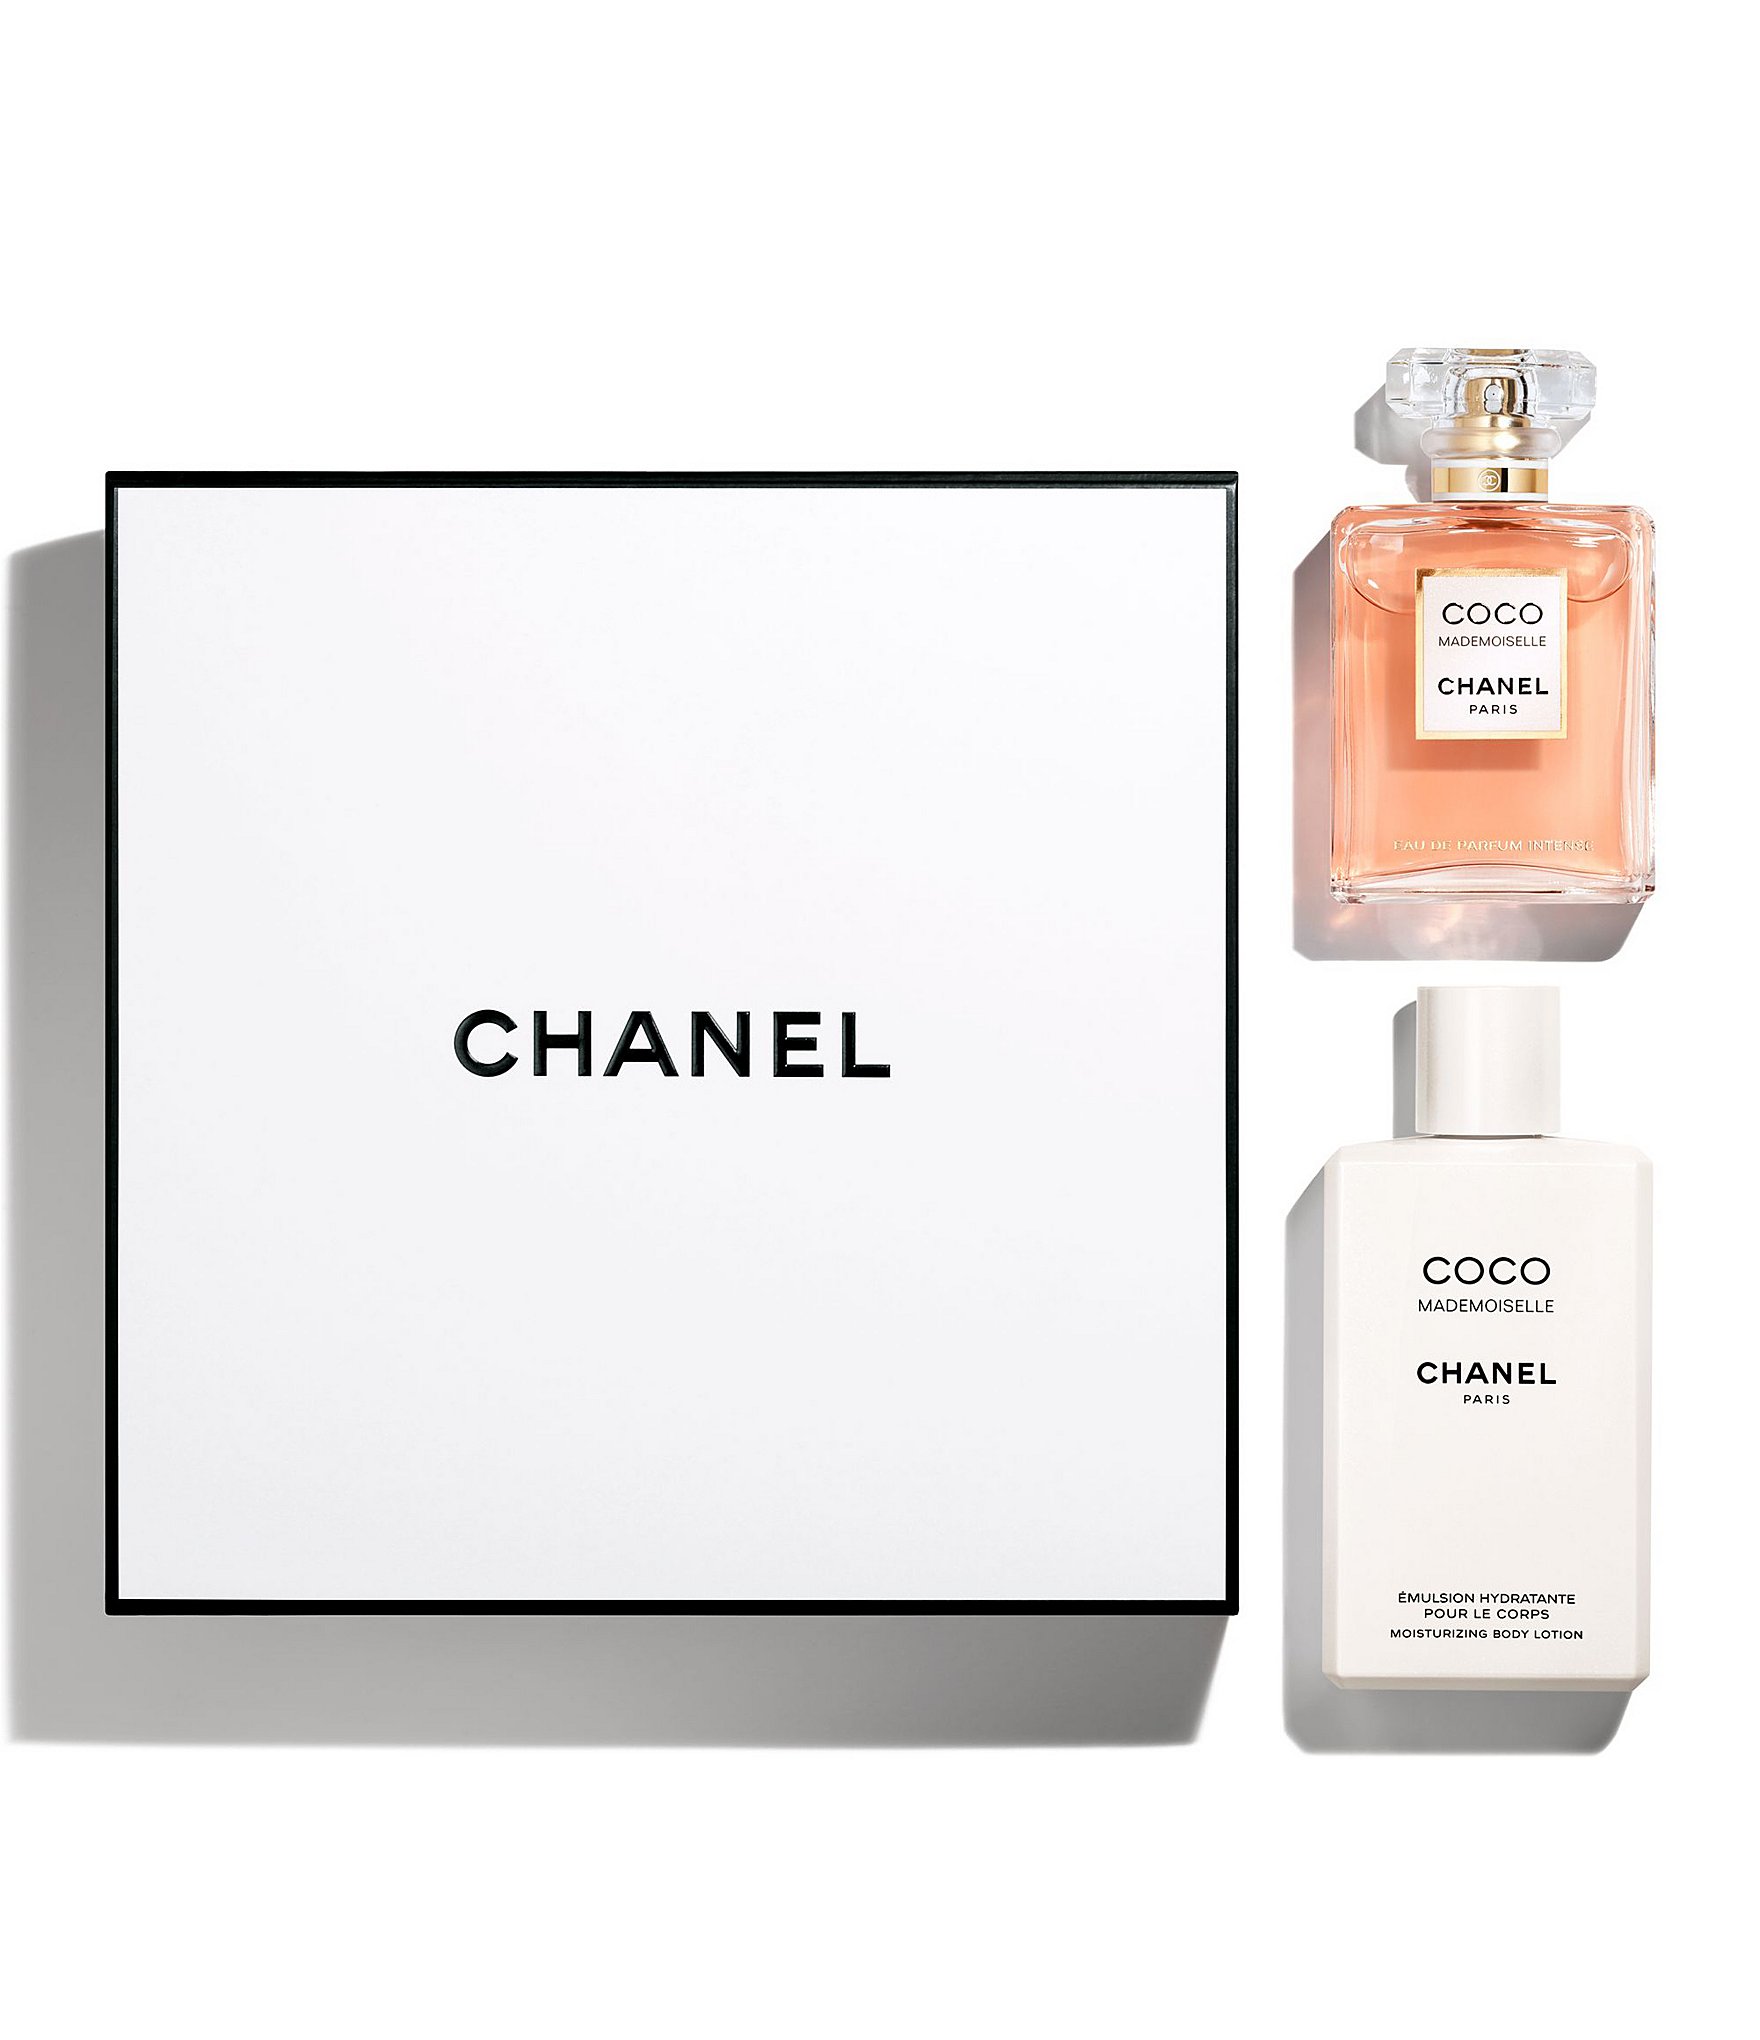 lotion coco chanel mademoiselle